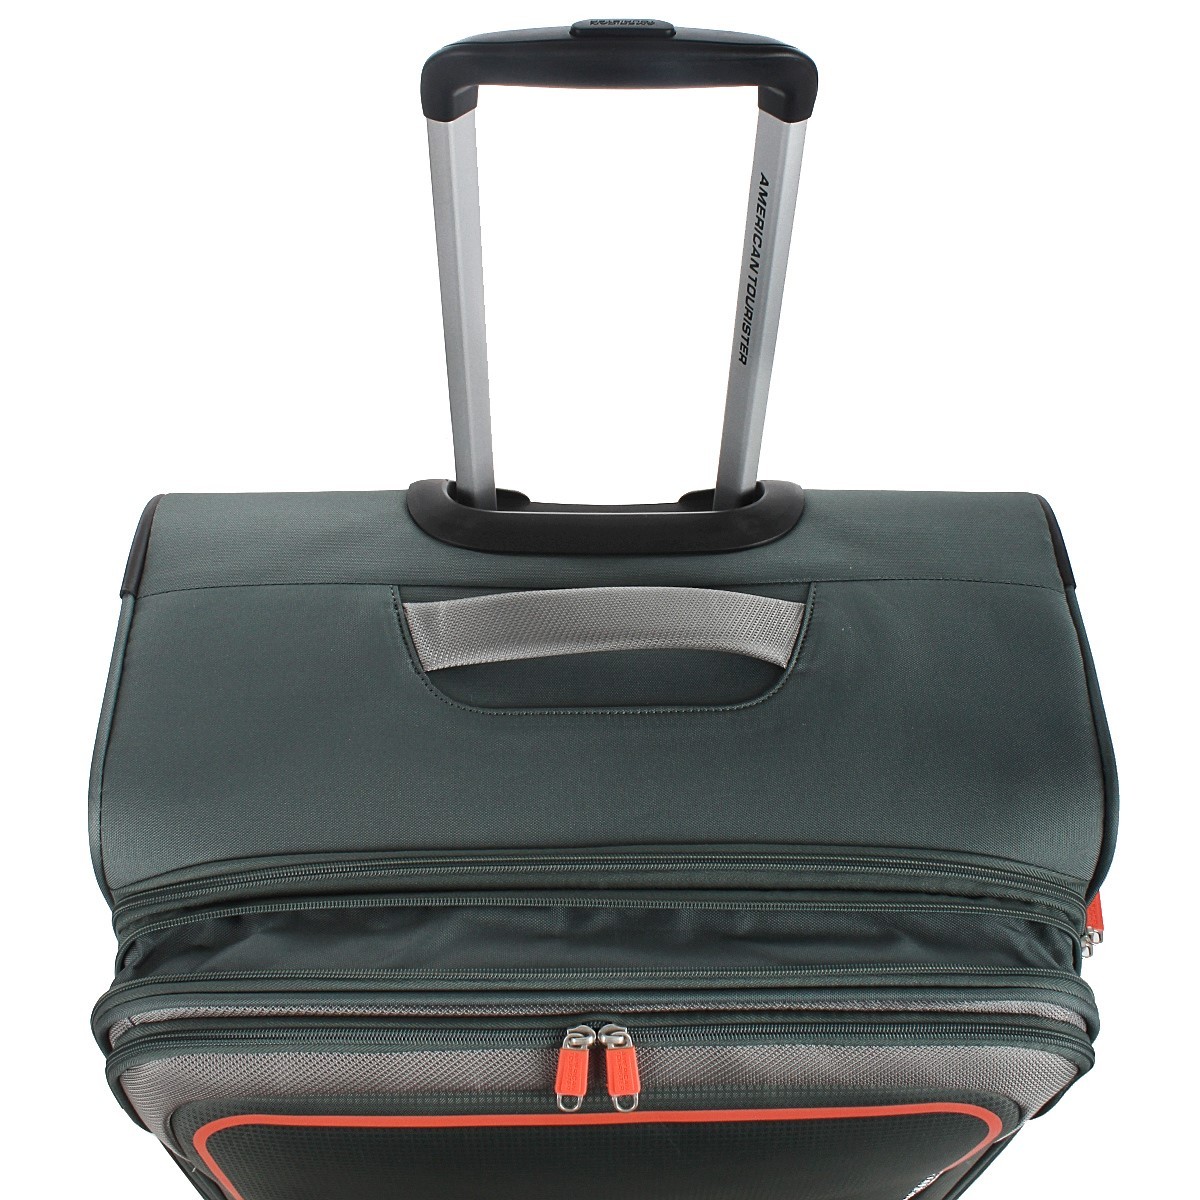 American tourister by samsonite Spinner l 4 ruote Dark forest Pulsonic MD6*04003